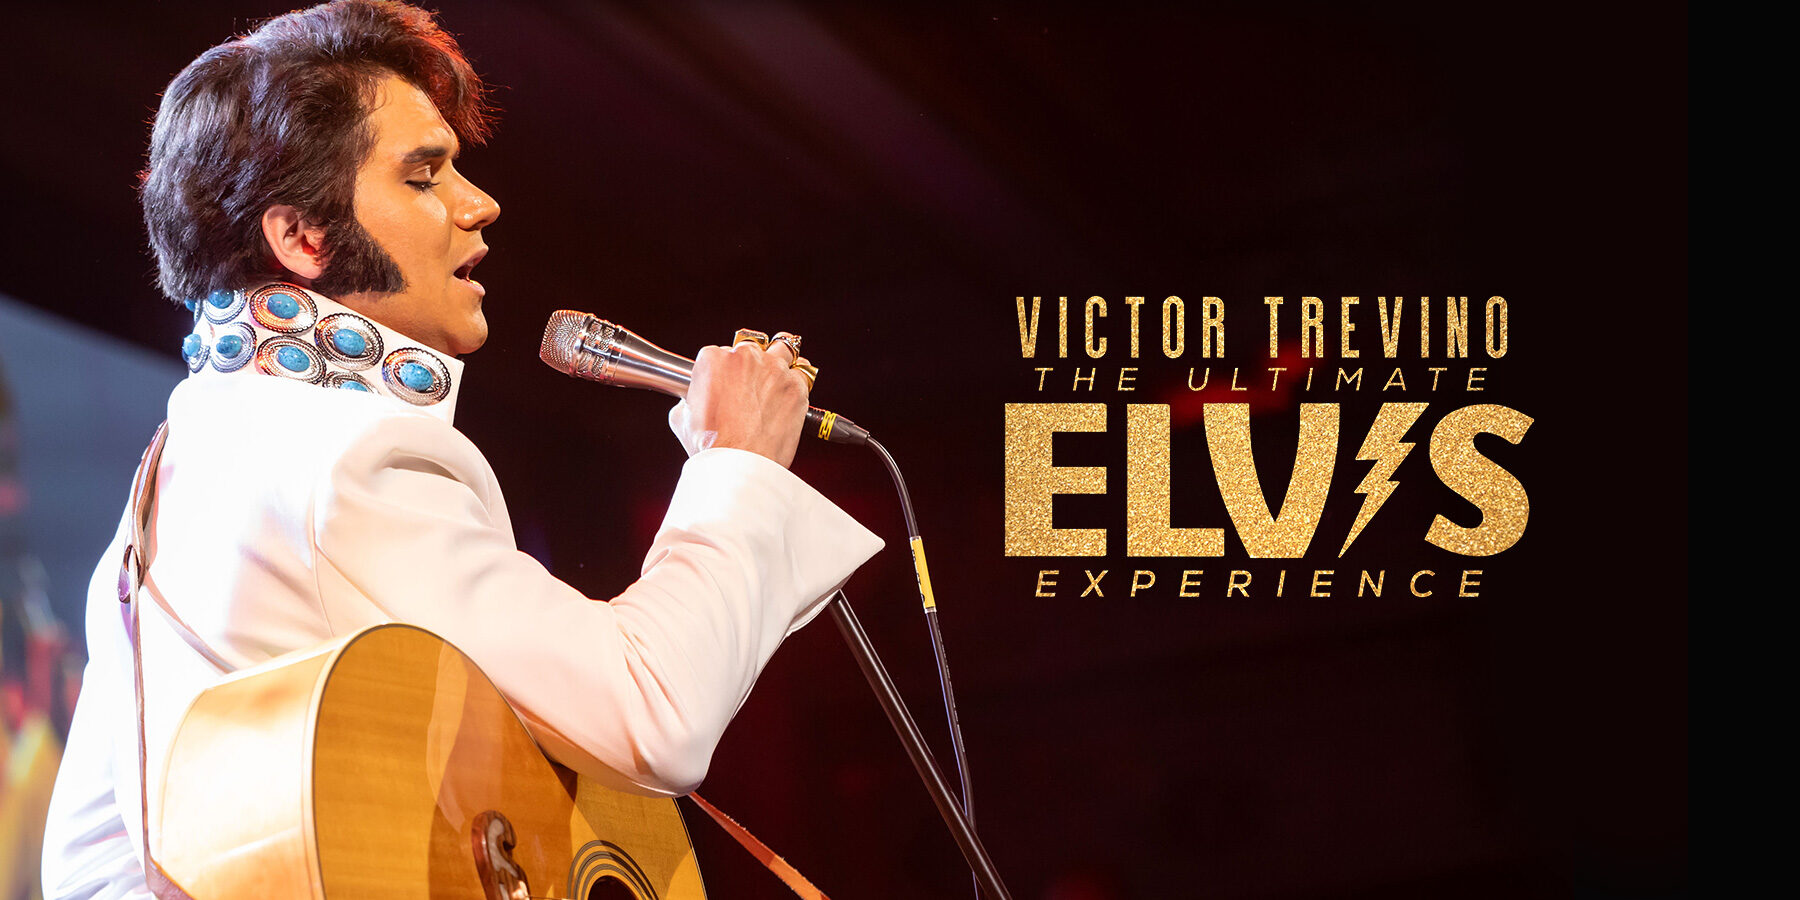 Victor Trevino The Ultimate Elvis Experience